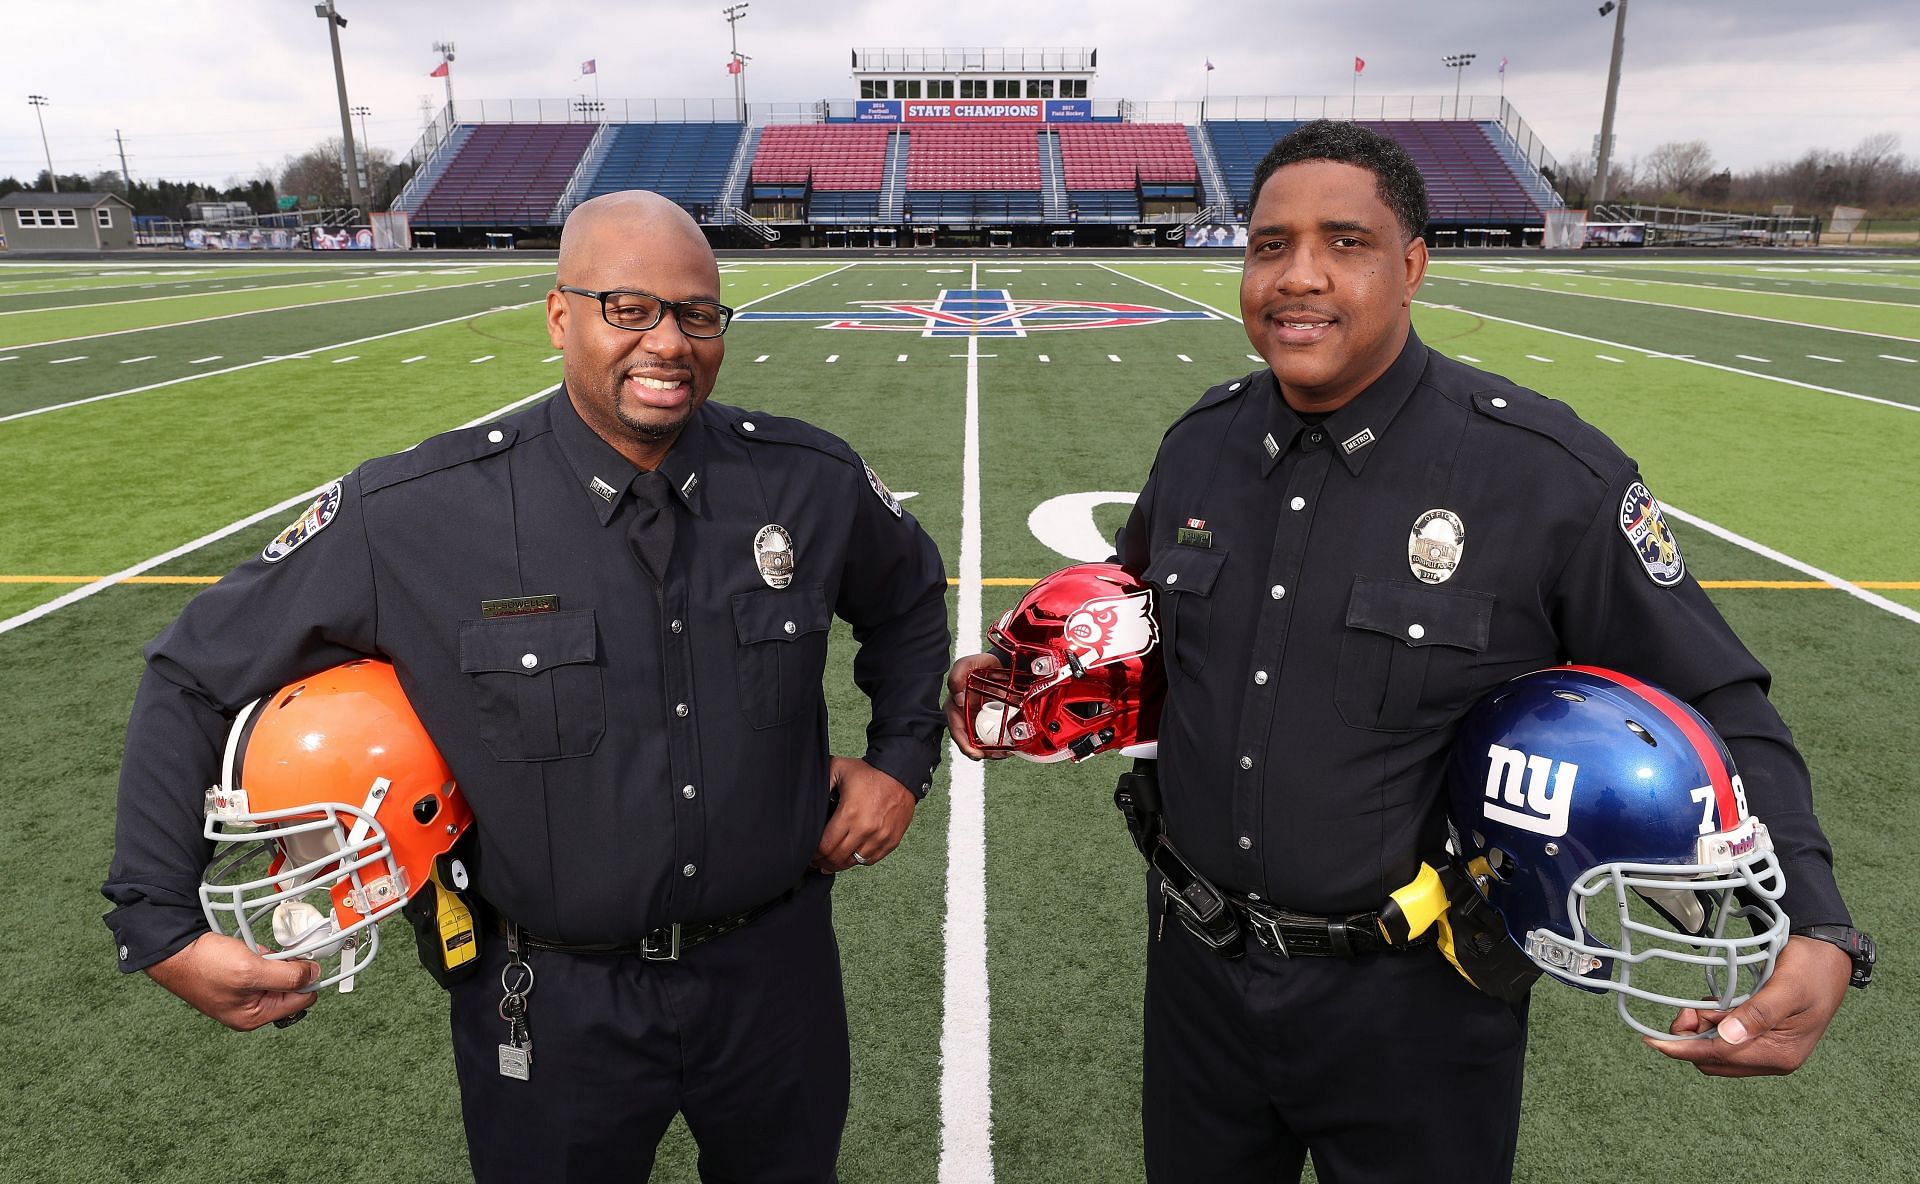 Isaac Sowells and Jason Hilliard, Image Credit: Courier Journal